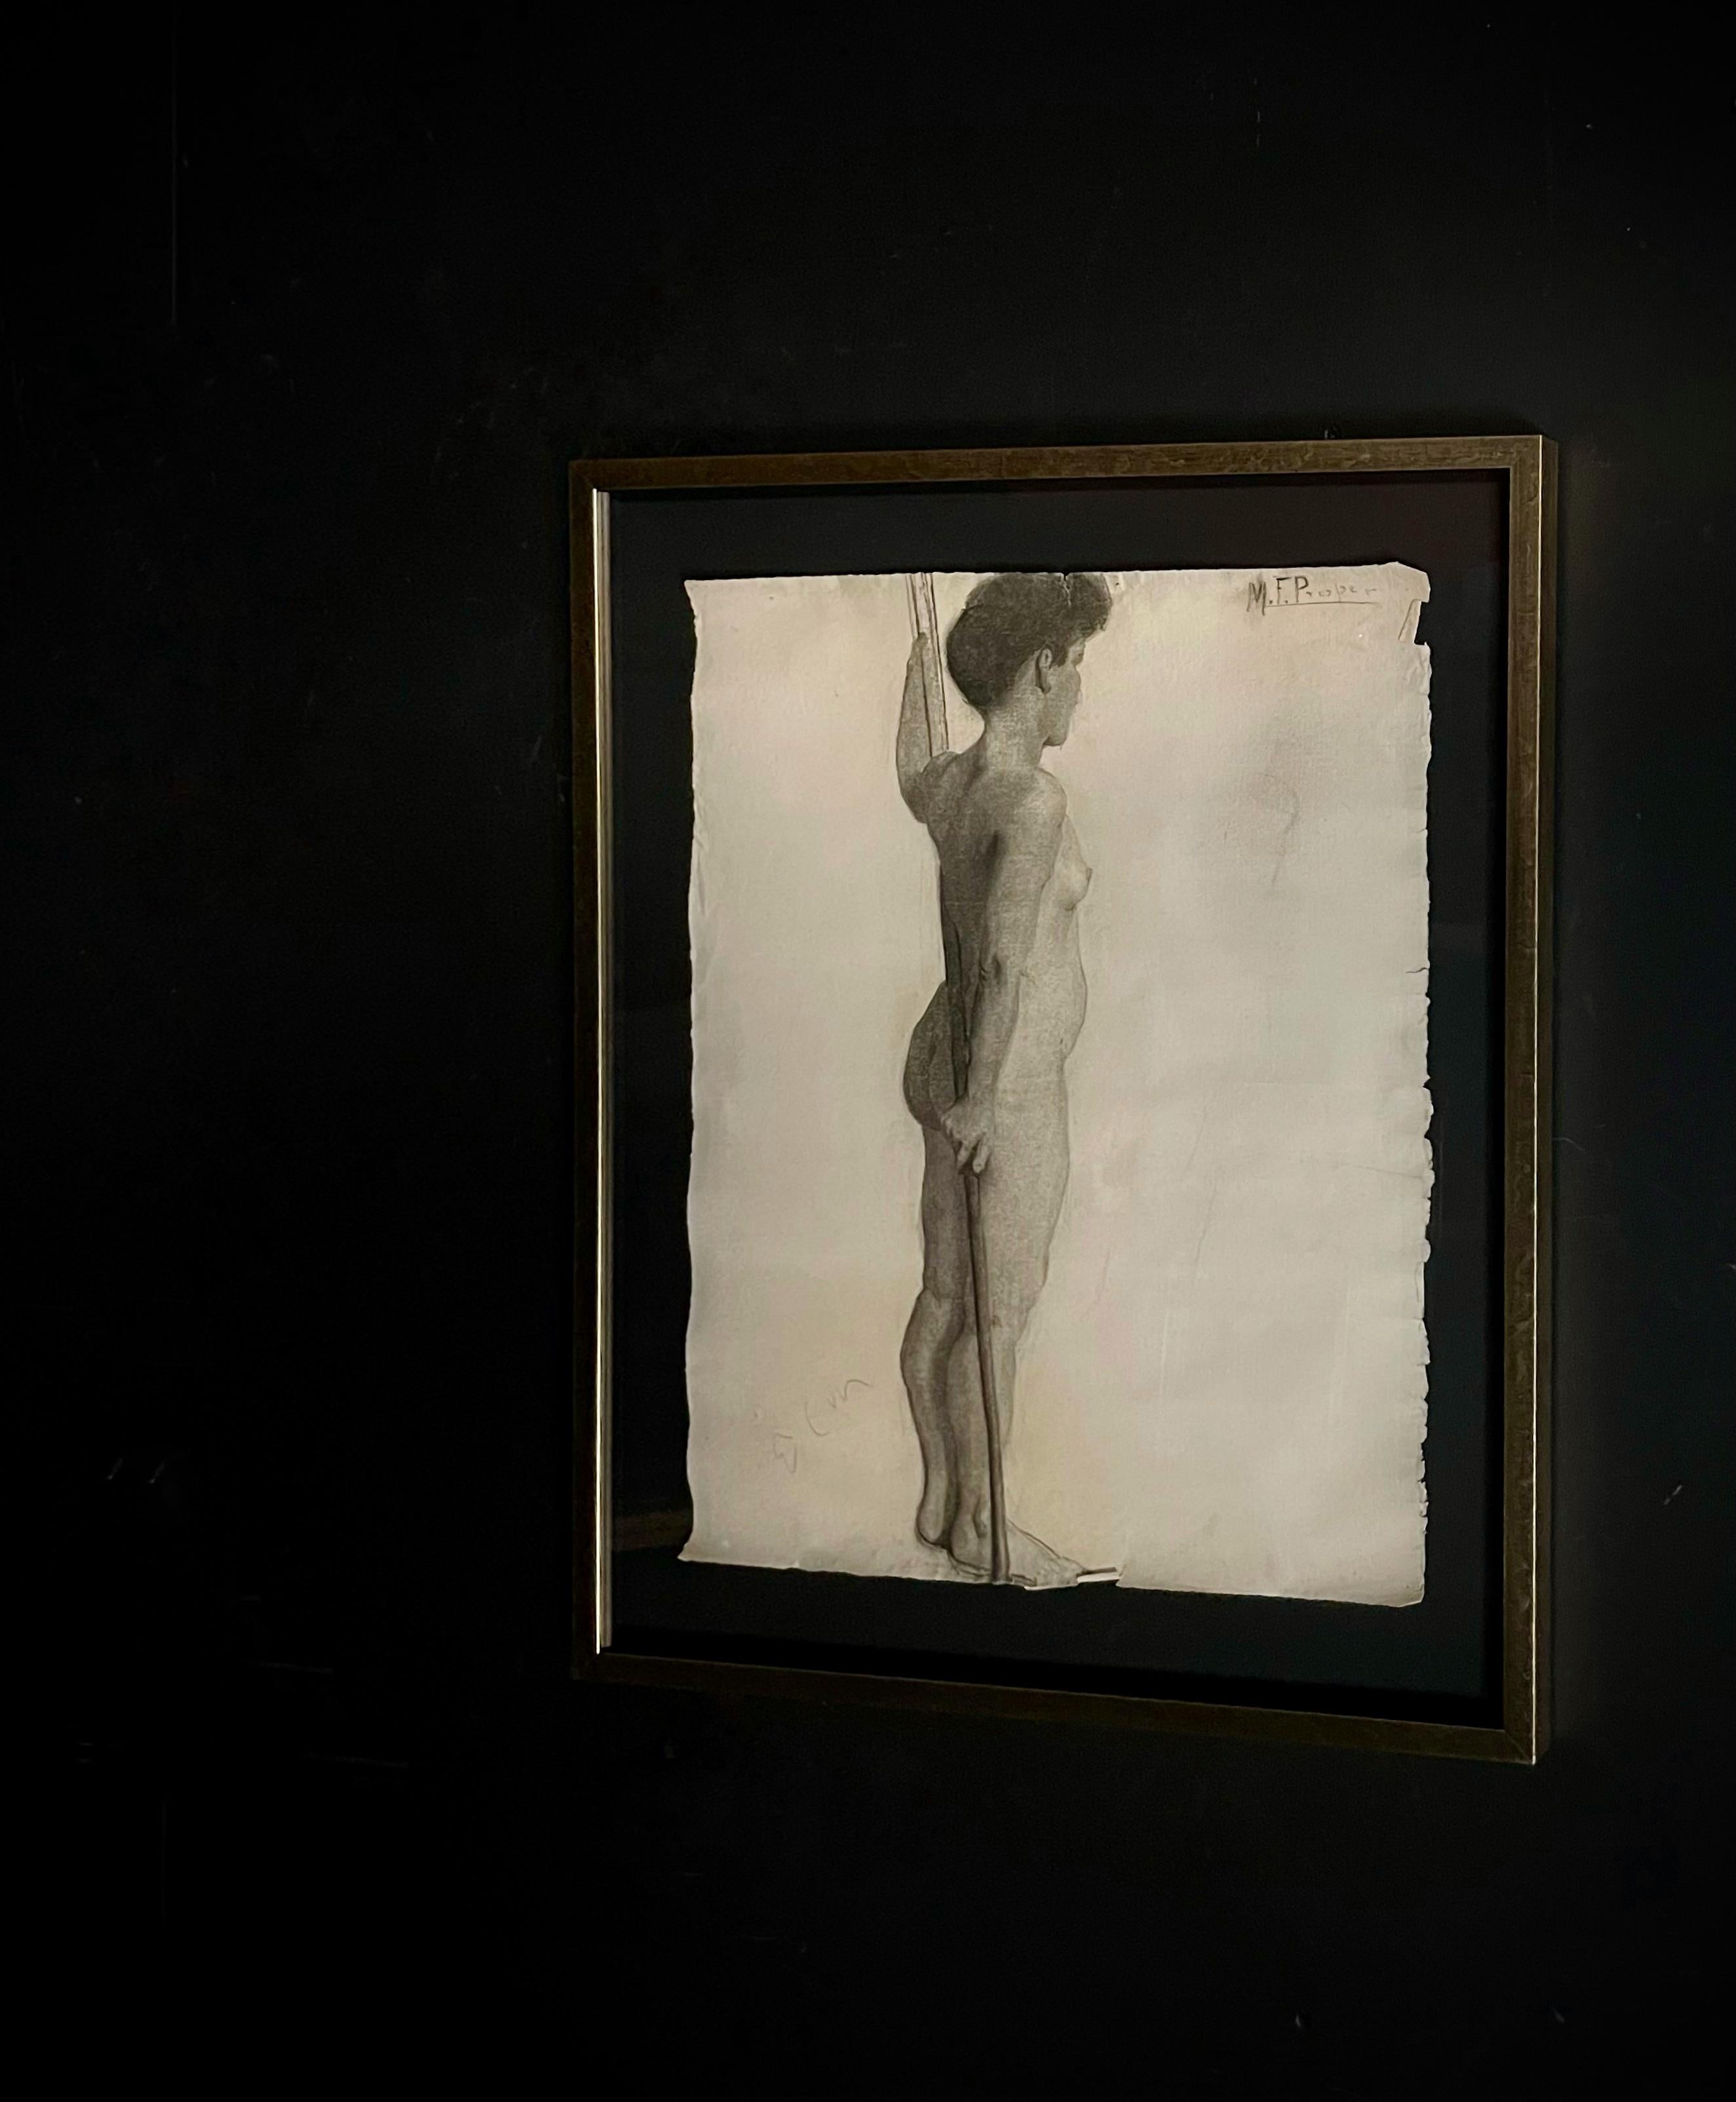 Antique Charcoal Nude Study Drawing. Newly framed and museum mounted. Part of a collection of 6. Five nude drawings, and one portrait. (Please see other listings. We have these listed separately.) Believed to be from the turn of the century, as one